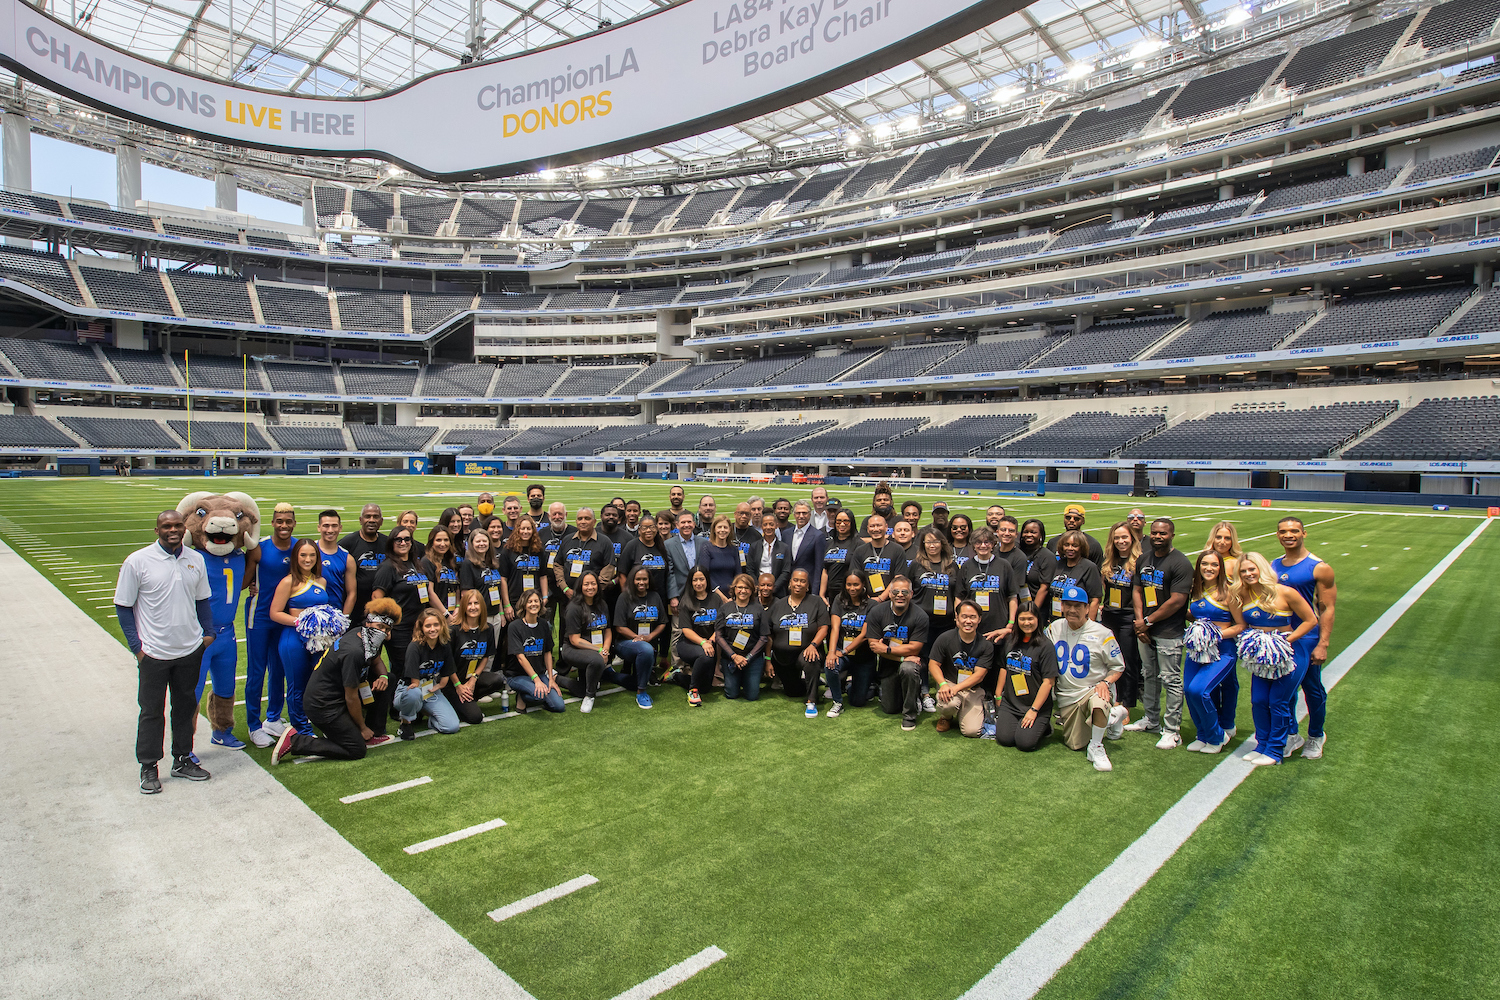 Homeboy Industries Receives Support from LA Super Bowl Host Committee